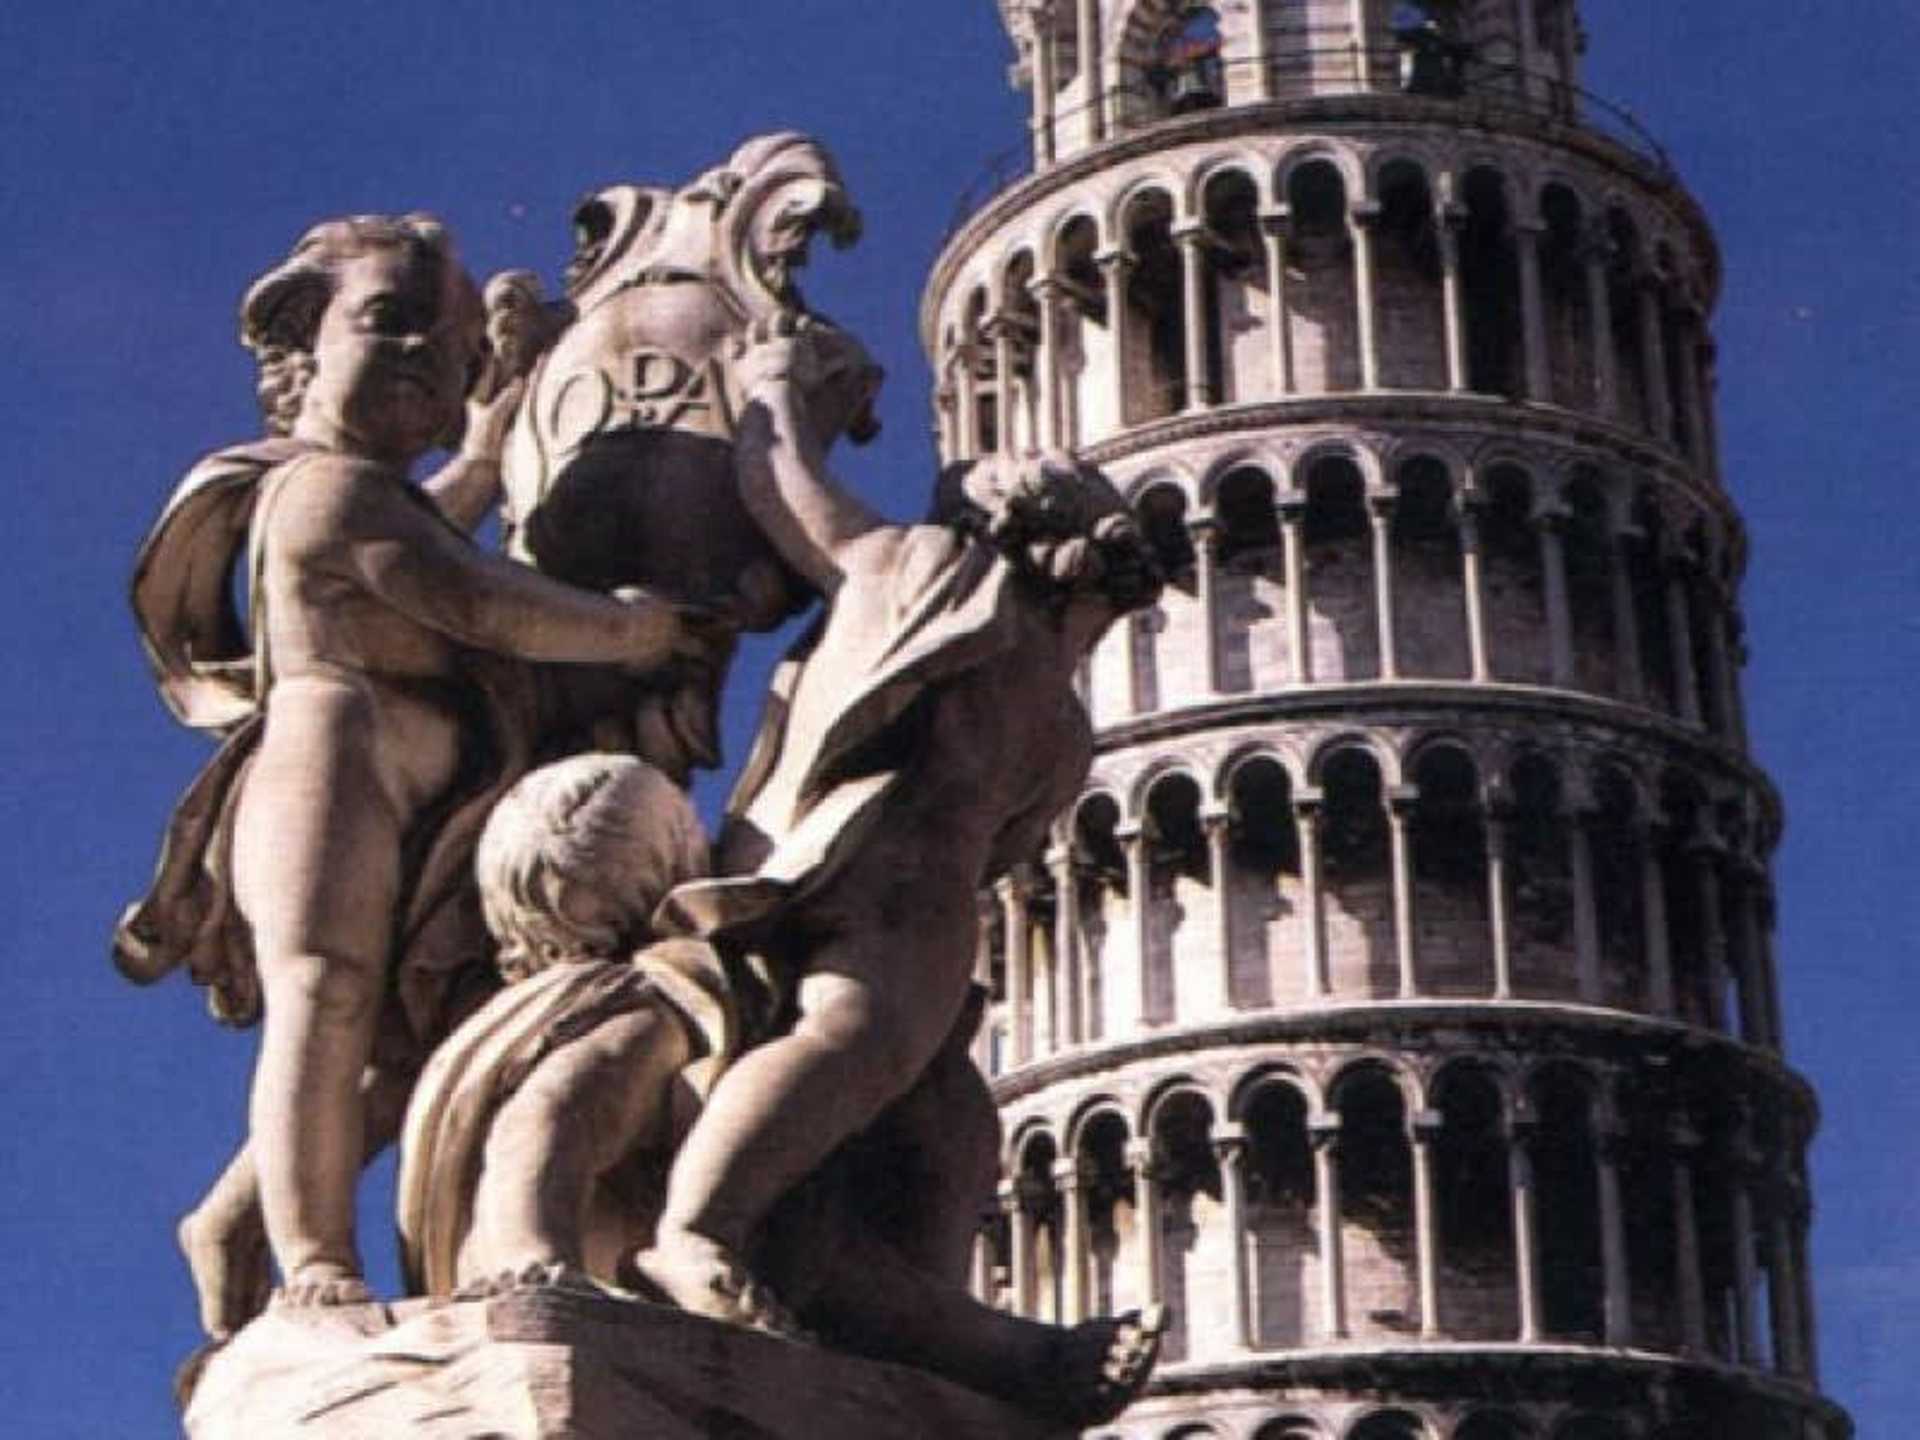 The Leaning Tower of Pisa Exclusive Tour